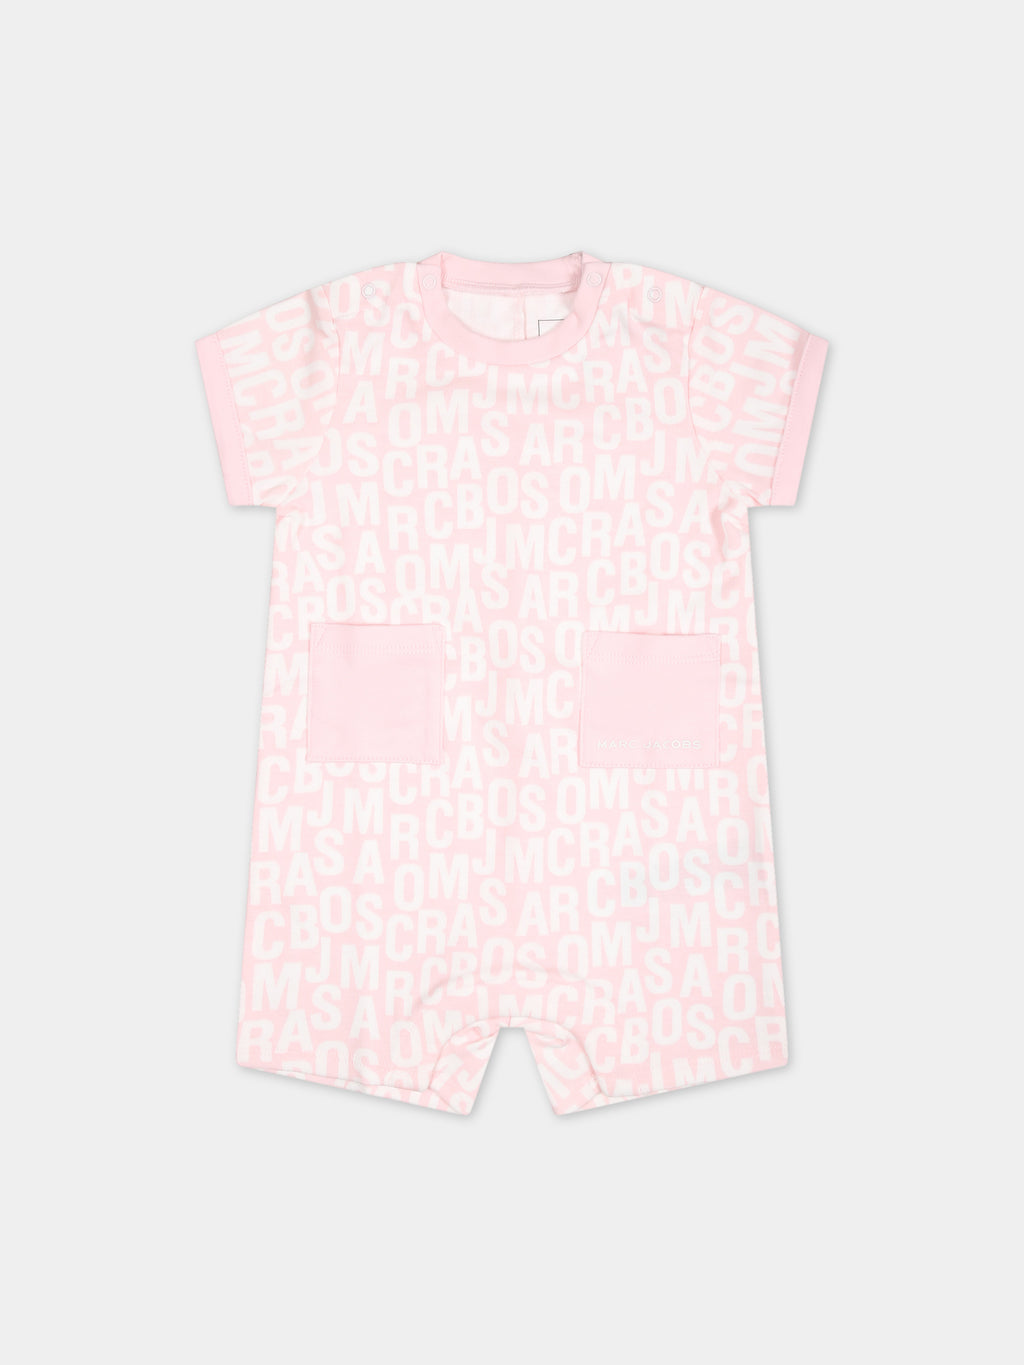 Pink romper for baby girl with logo